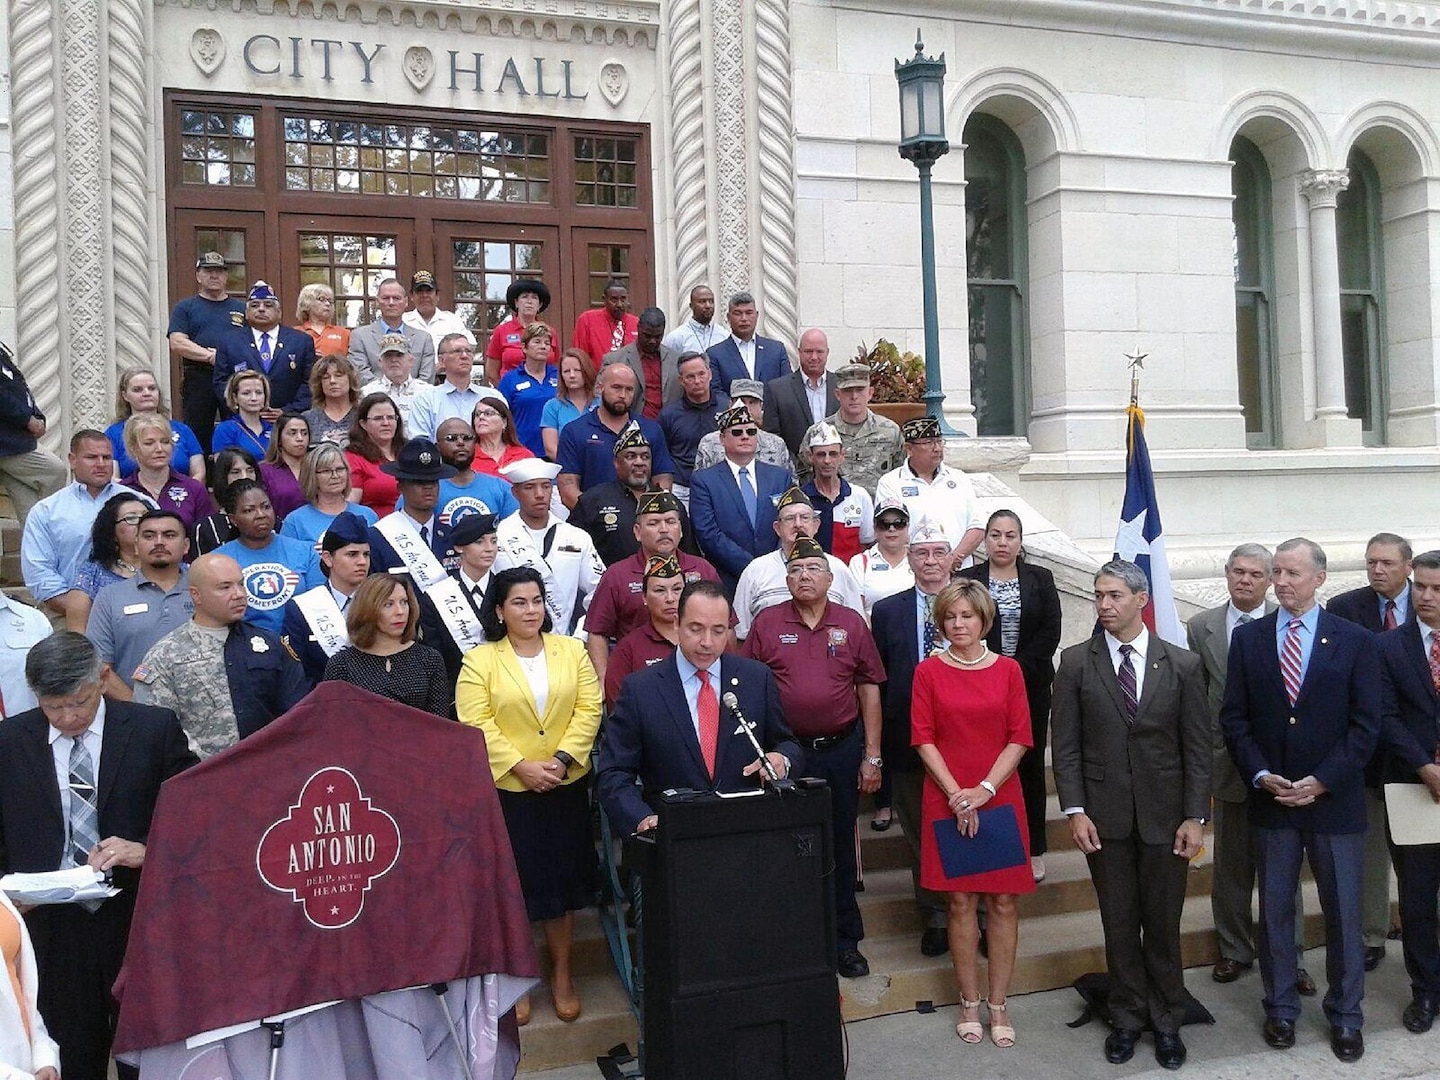 Texas State Senator Jose Menendez (District 26) speaks to those gathered at the unveiling ceremony for the newly trademarked Military City USA logo at City Hall June 19.